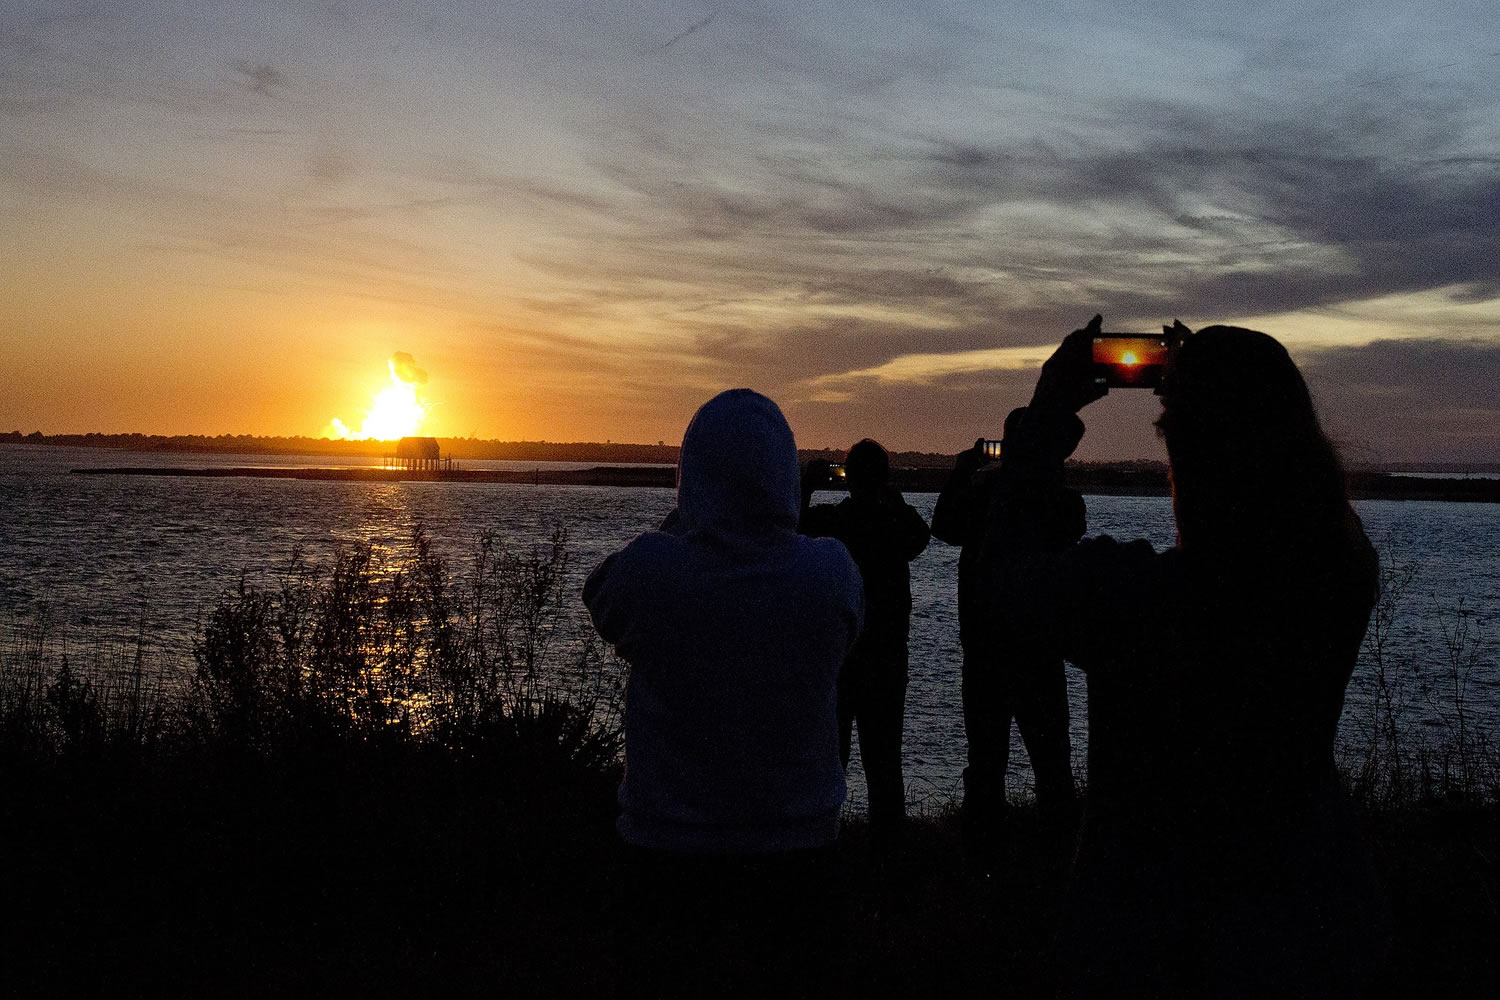 Spectators in Chincoteague, Va., watch the fireball from the explosion of the unmanned Orbital Sciences Corp.'s Antares rocket and Cygnus cargo capsule seconds after liftoff from Wallops Island, Va.